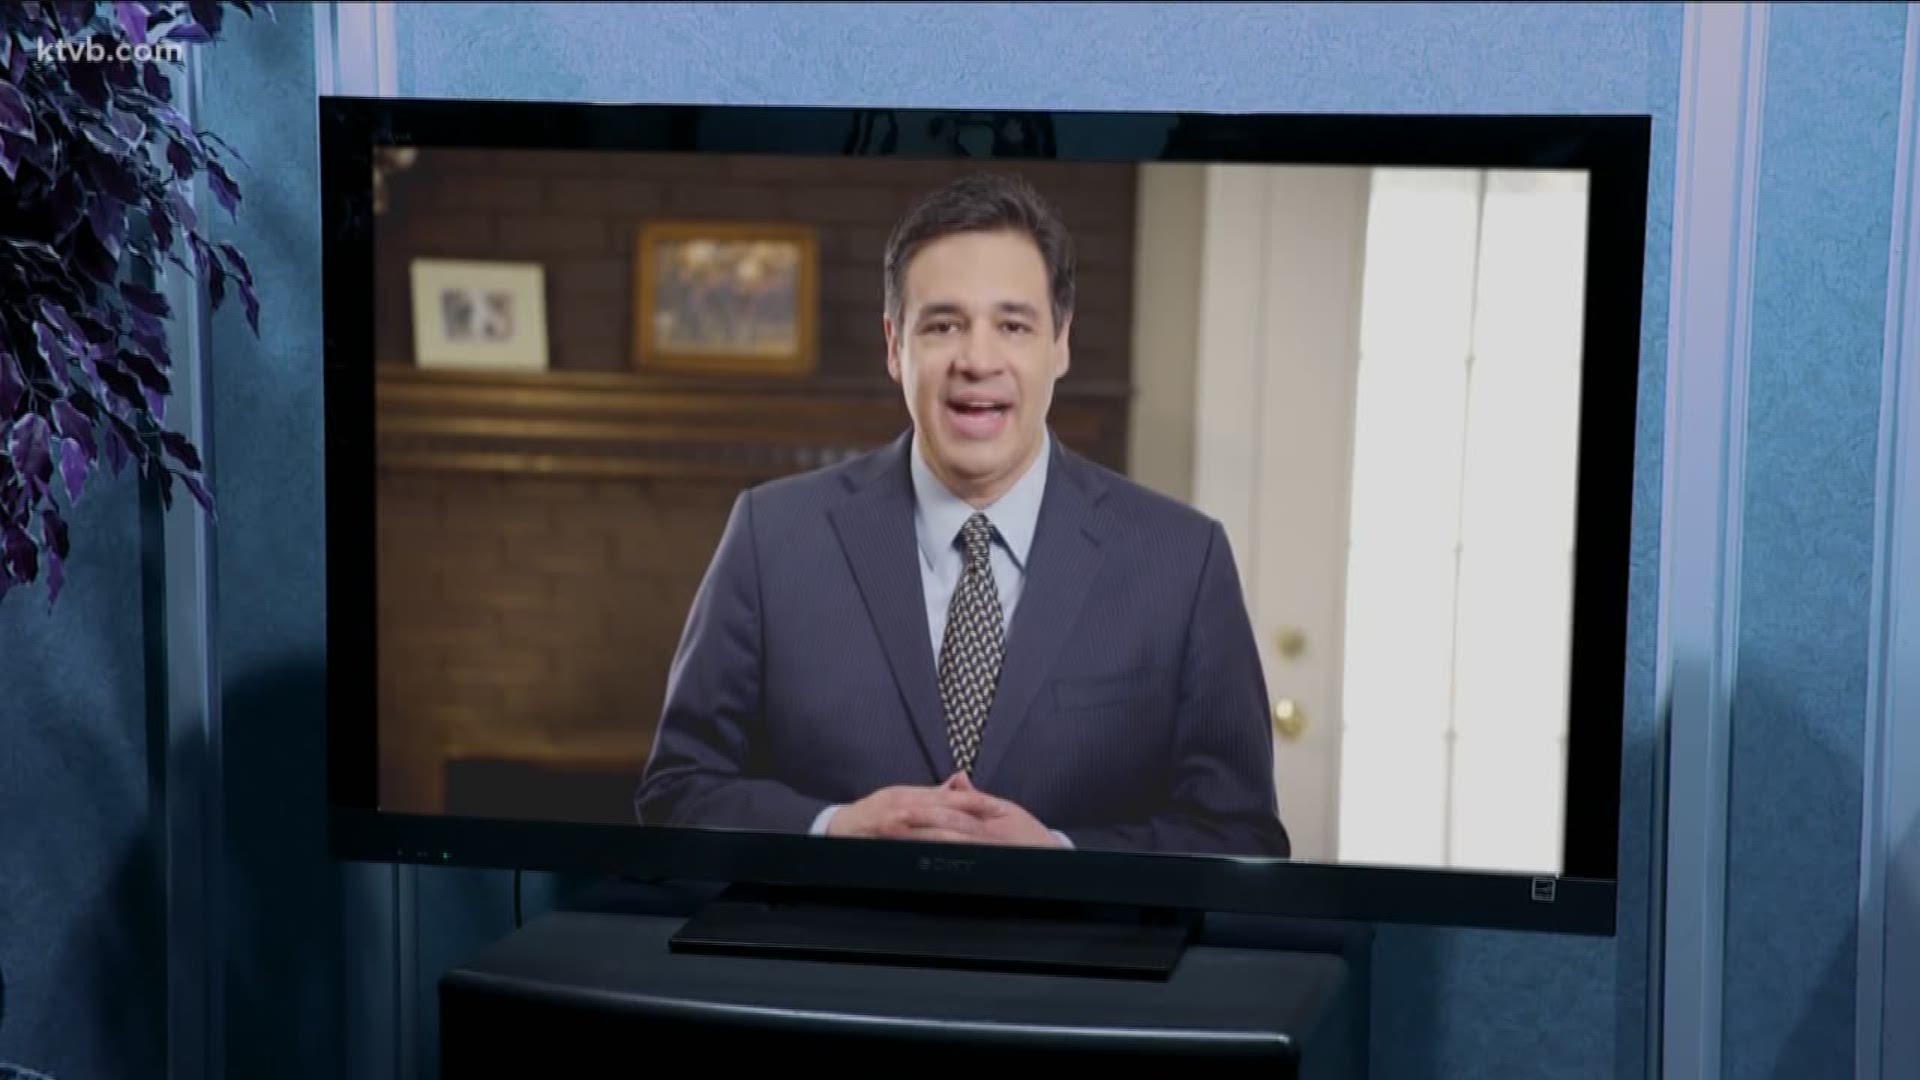 We check the facts in the latest campaign ad from Raul Labrador.